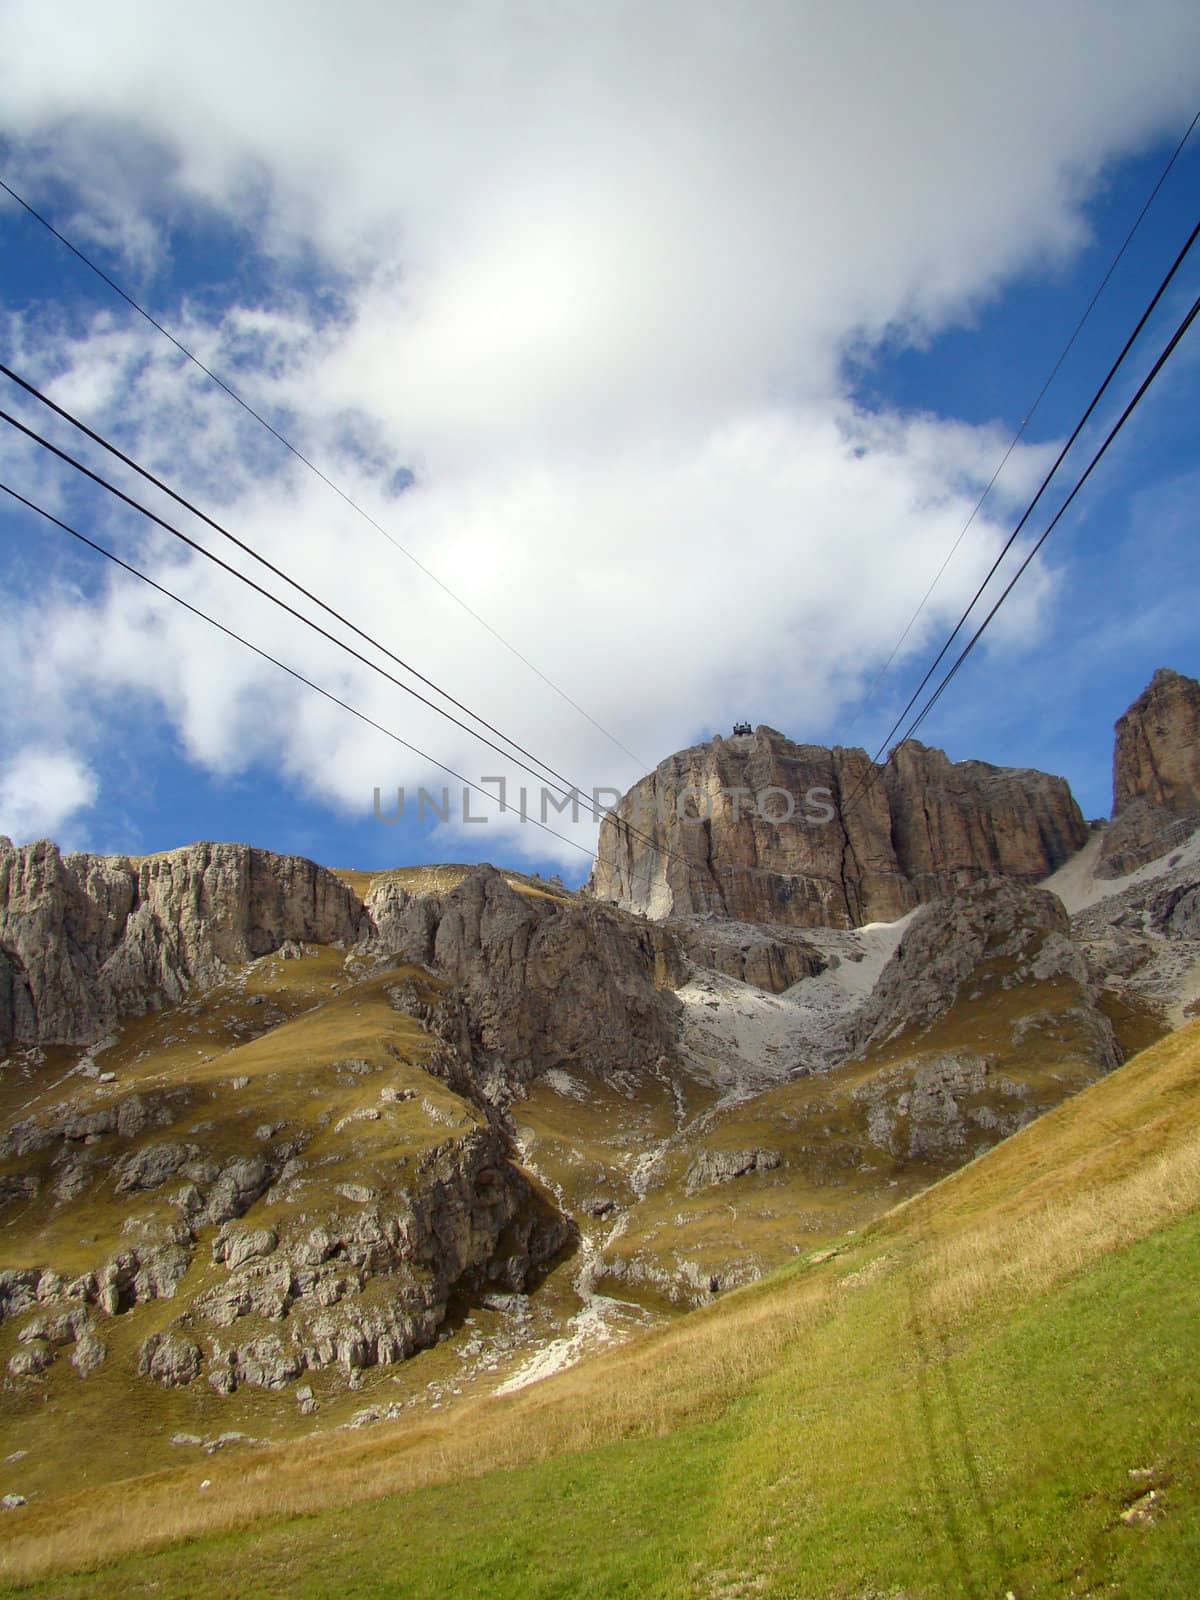 
cableway in Dolomite Mountains in Italian Alps.Italy.Europe.2007